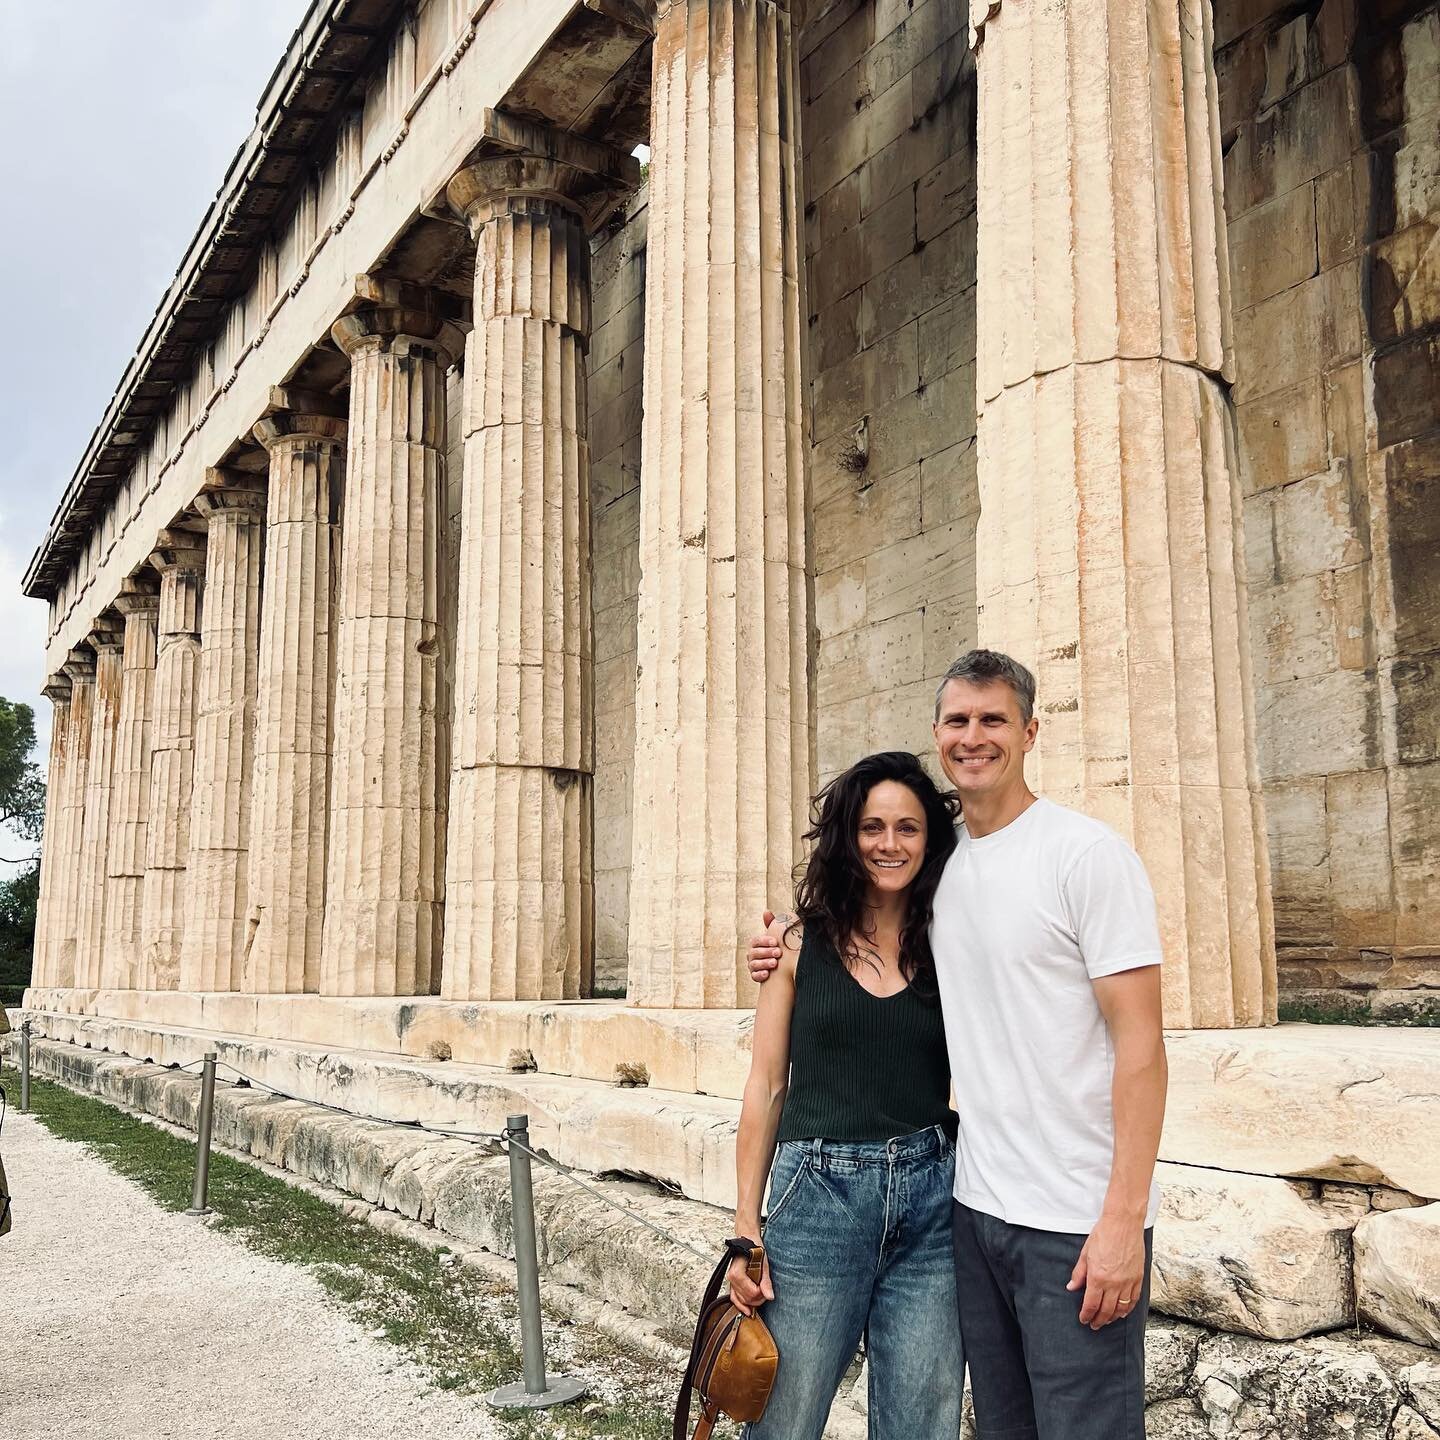 Our last day among ancient things. 

This trip was WILD. We flew into the chaotic, gut-wrenching, outbreak of war. Missiles overhead. Military on every corner. Fear and frustration in every eye. 

Then landed in the warm embrace of Greece. Exquisite 